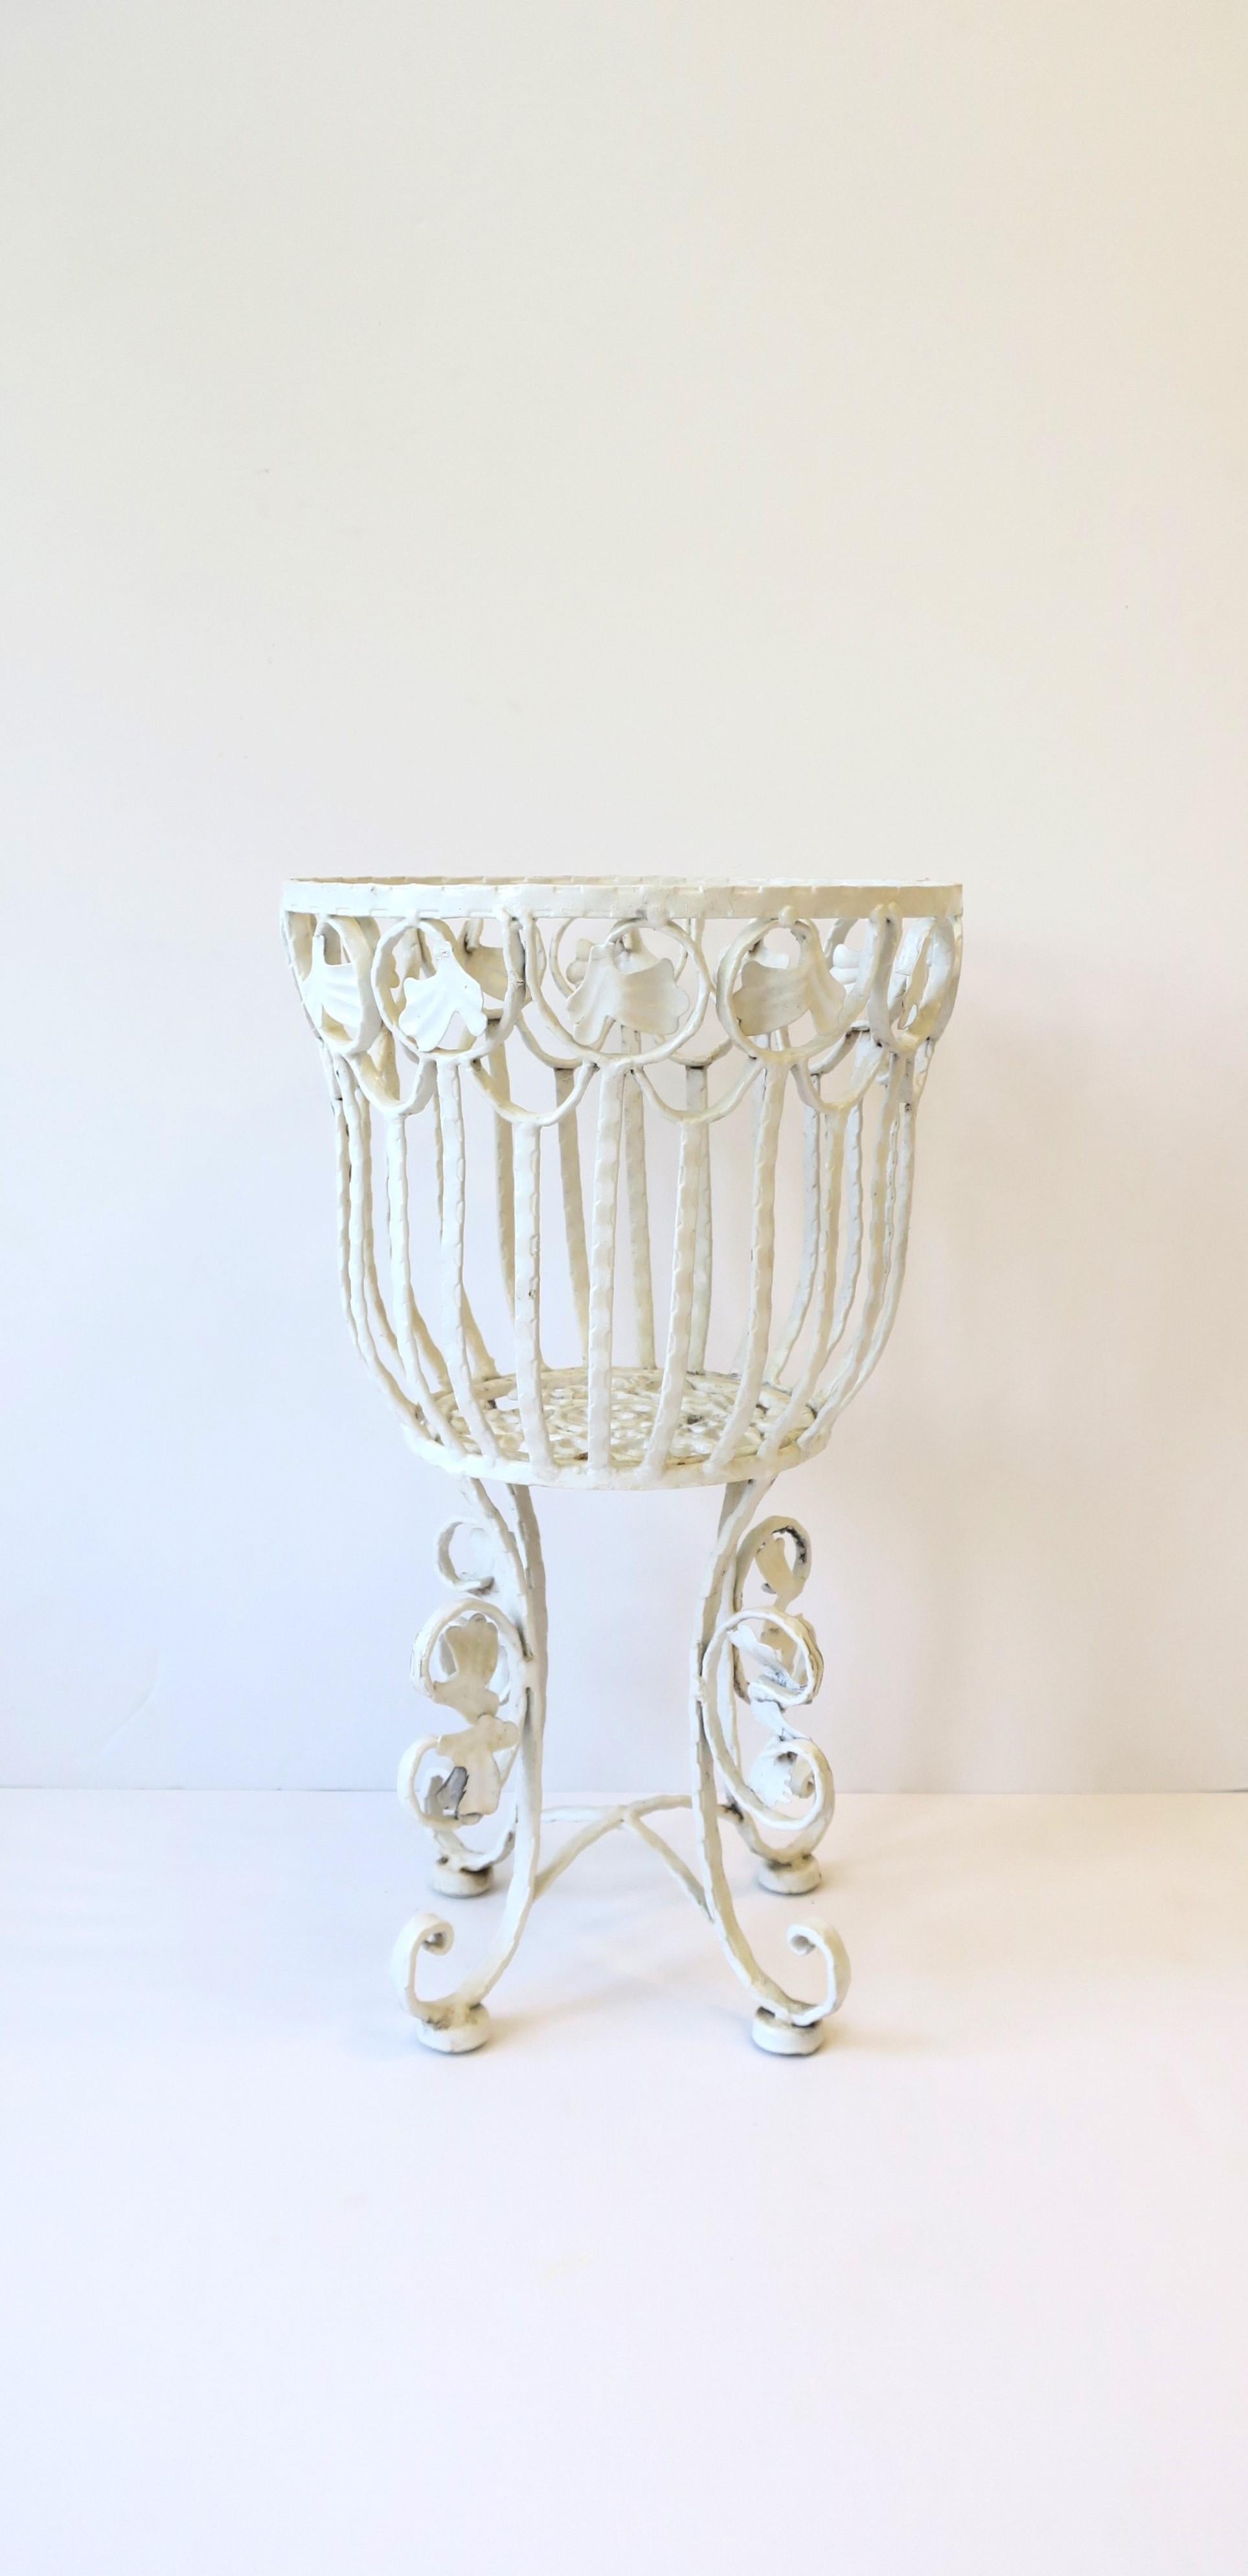 A substantial vintage outdoor garden or patio white cachepot flower or plant pot holder stand, circa mid-20th century, USA. Piece is painted wrought iron with 'basket' area for pot, leaf design near top of basket, and scrolled feet with leaves at